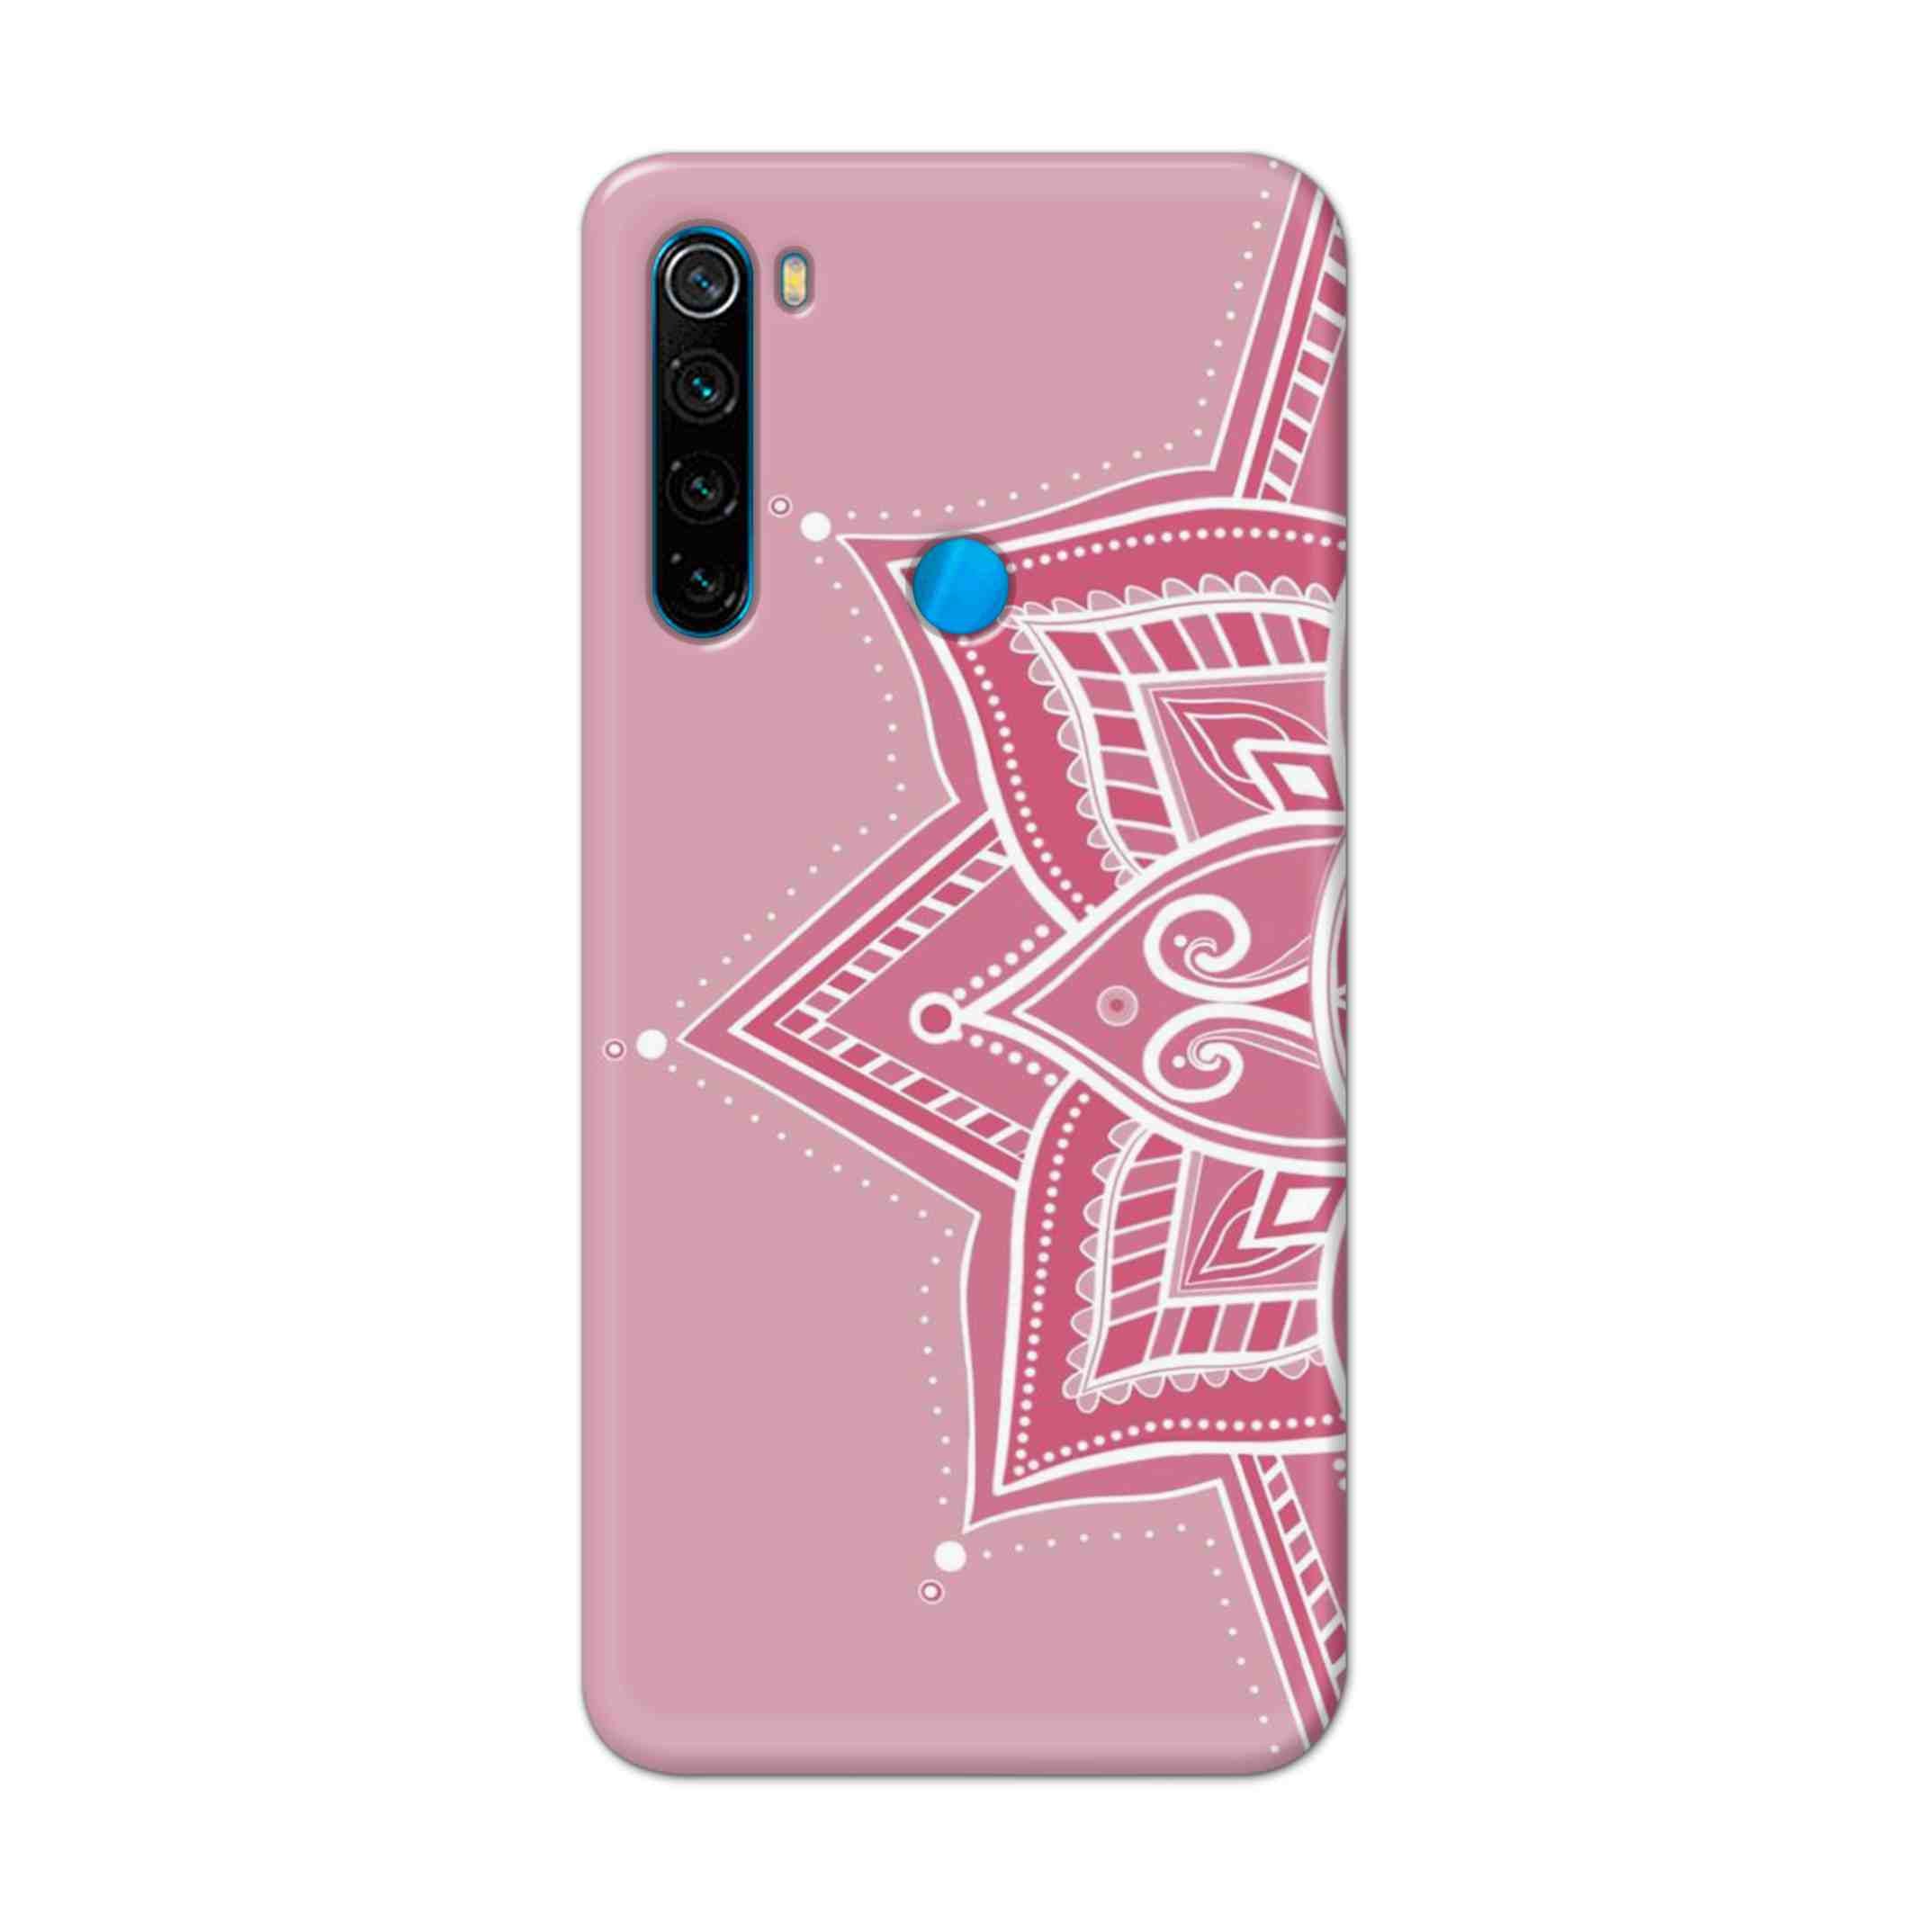 Buy Pink Rangoli Hard Back Mobile Phone Case Cover For Xiaomi Redmi Note 8 Online